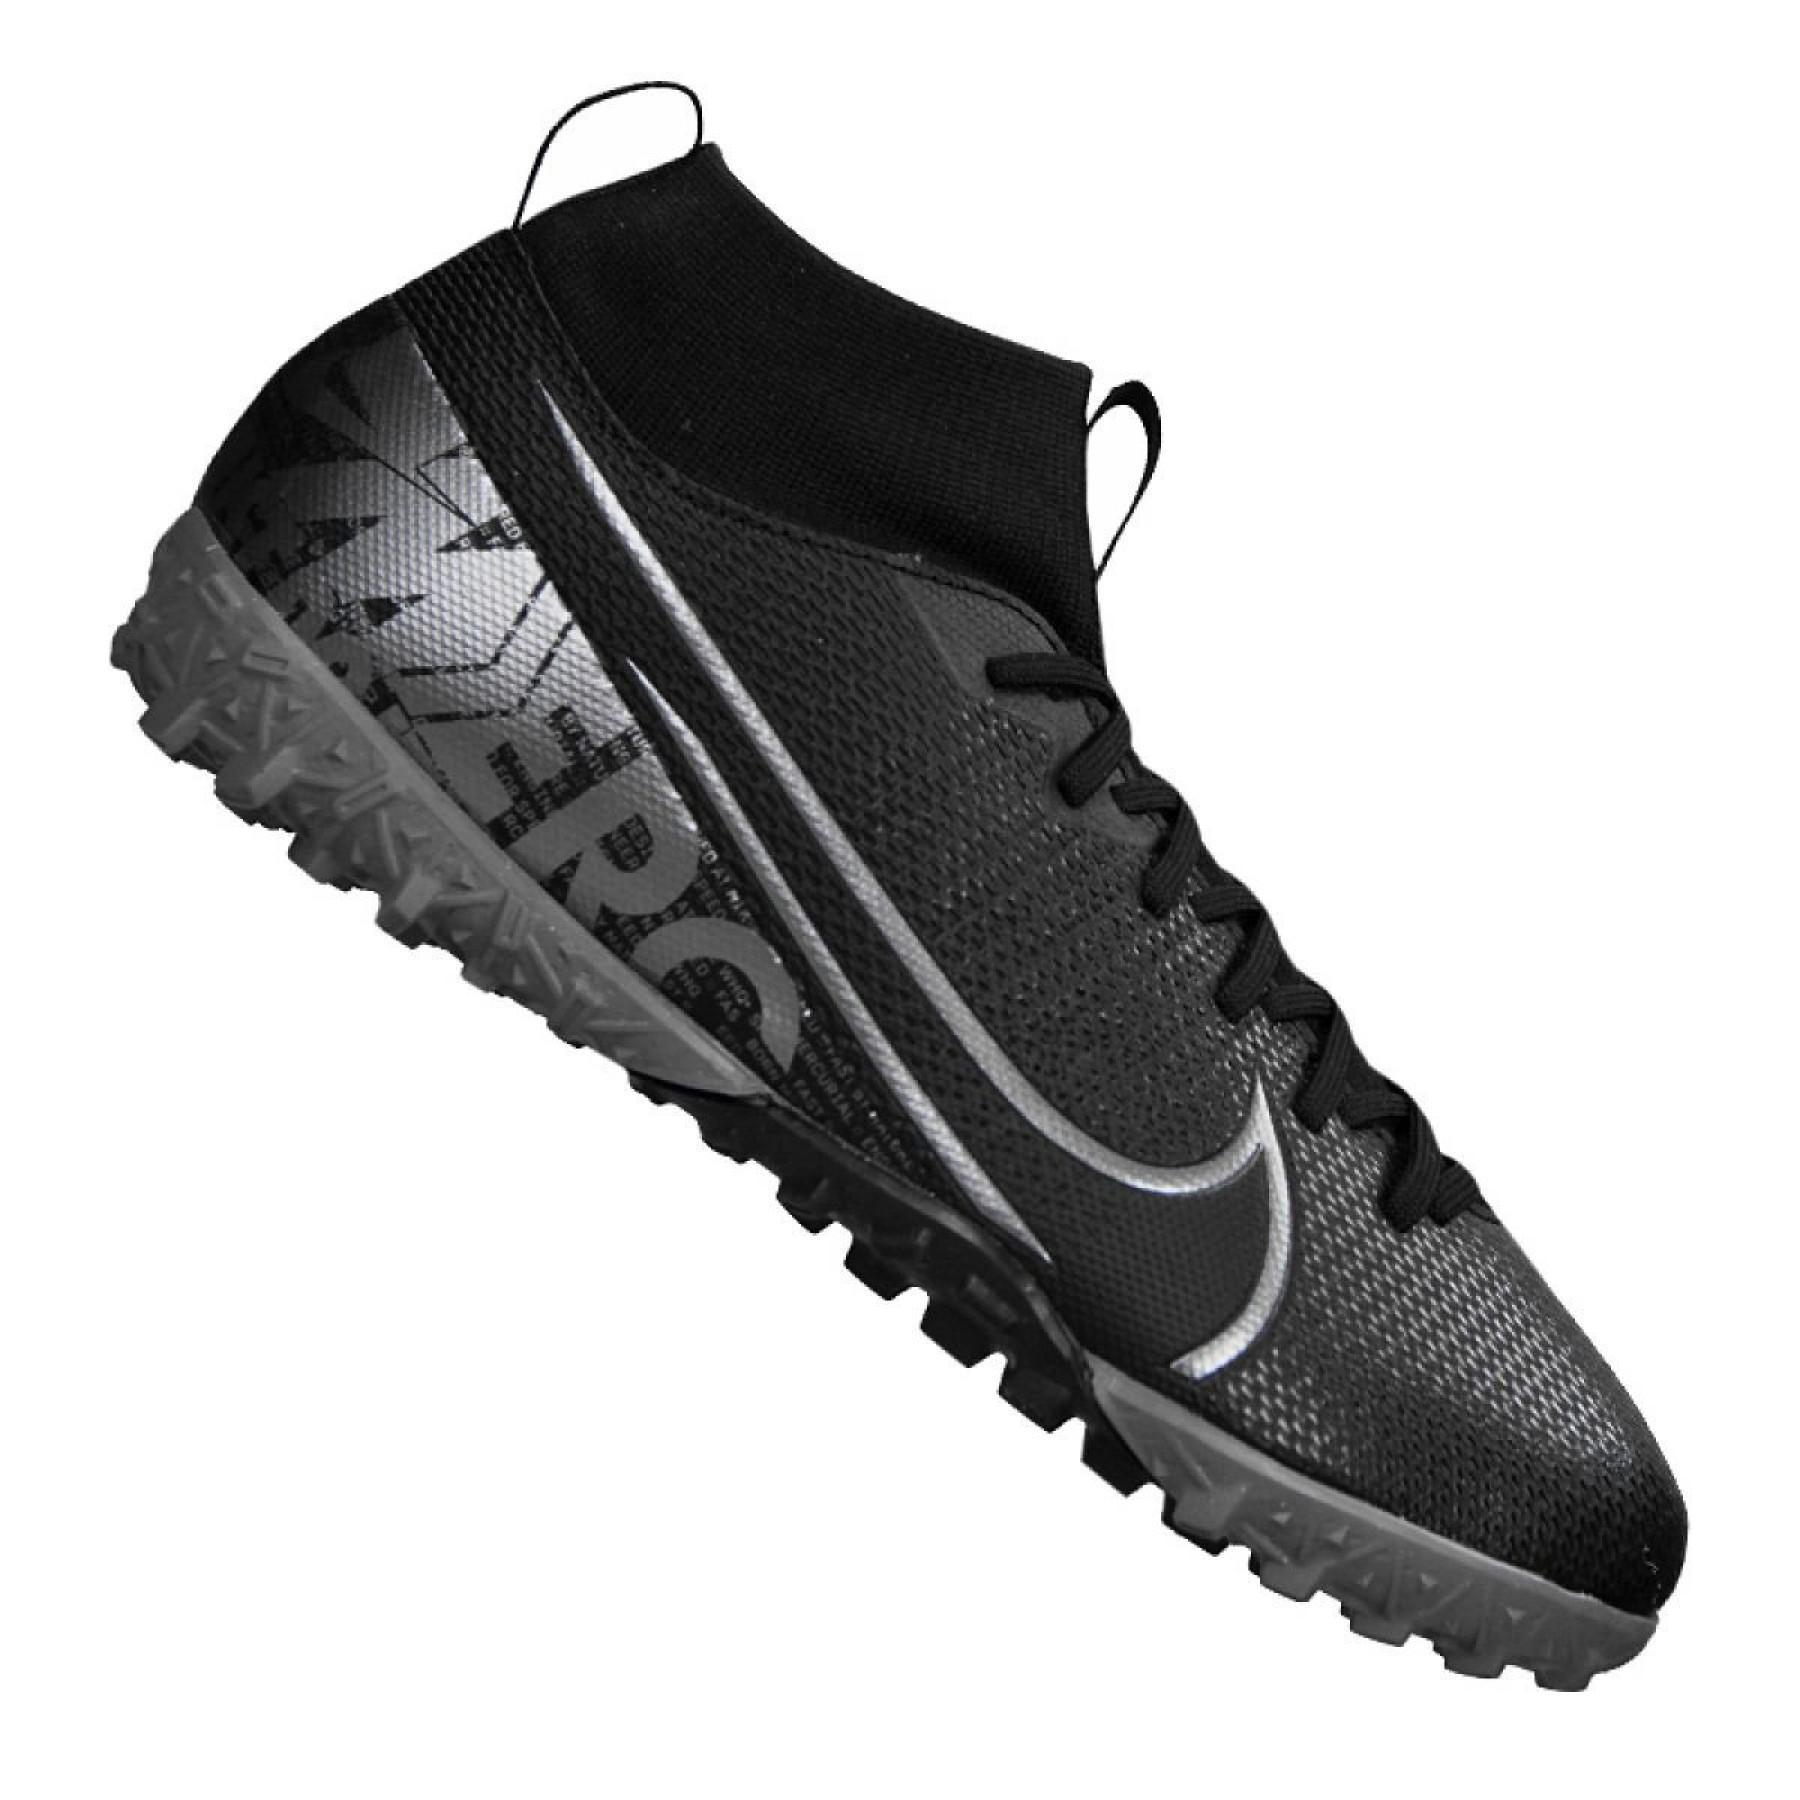 Chaussures de football enfant Nike Mercurial Superfly 7 Academy TF